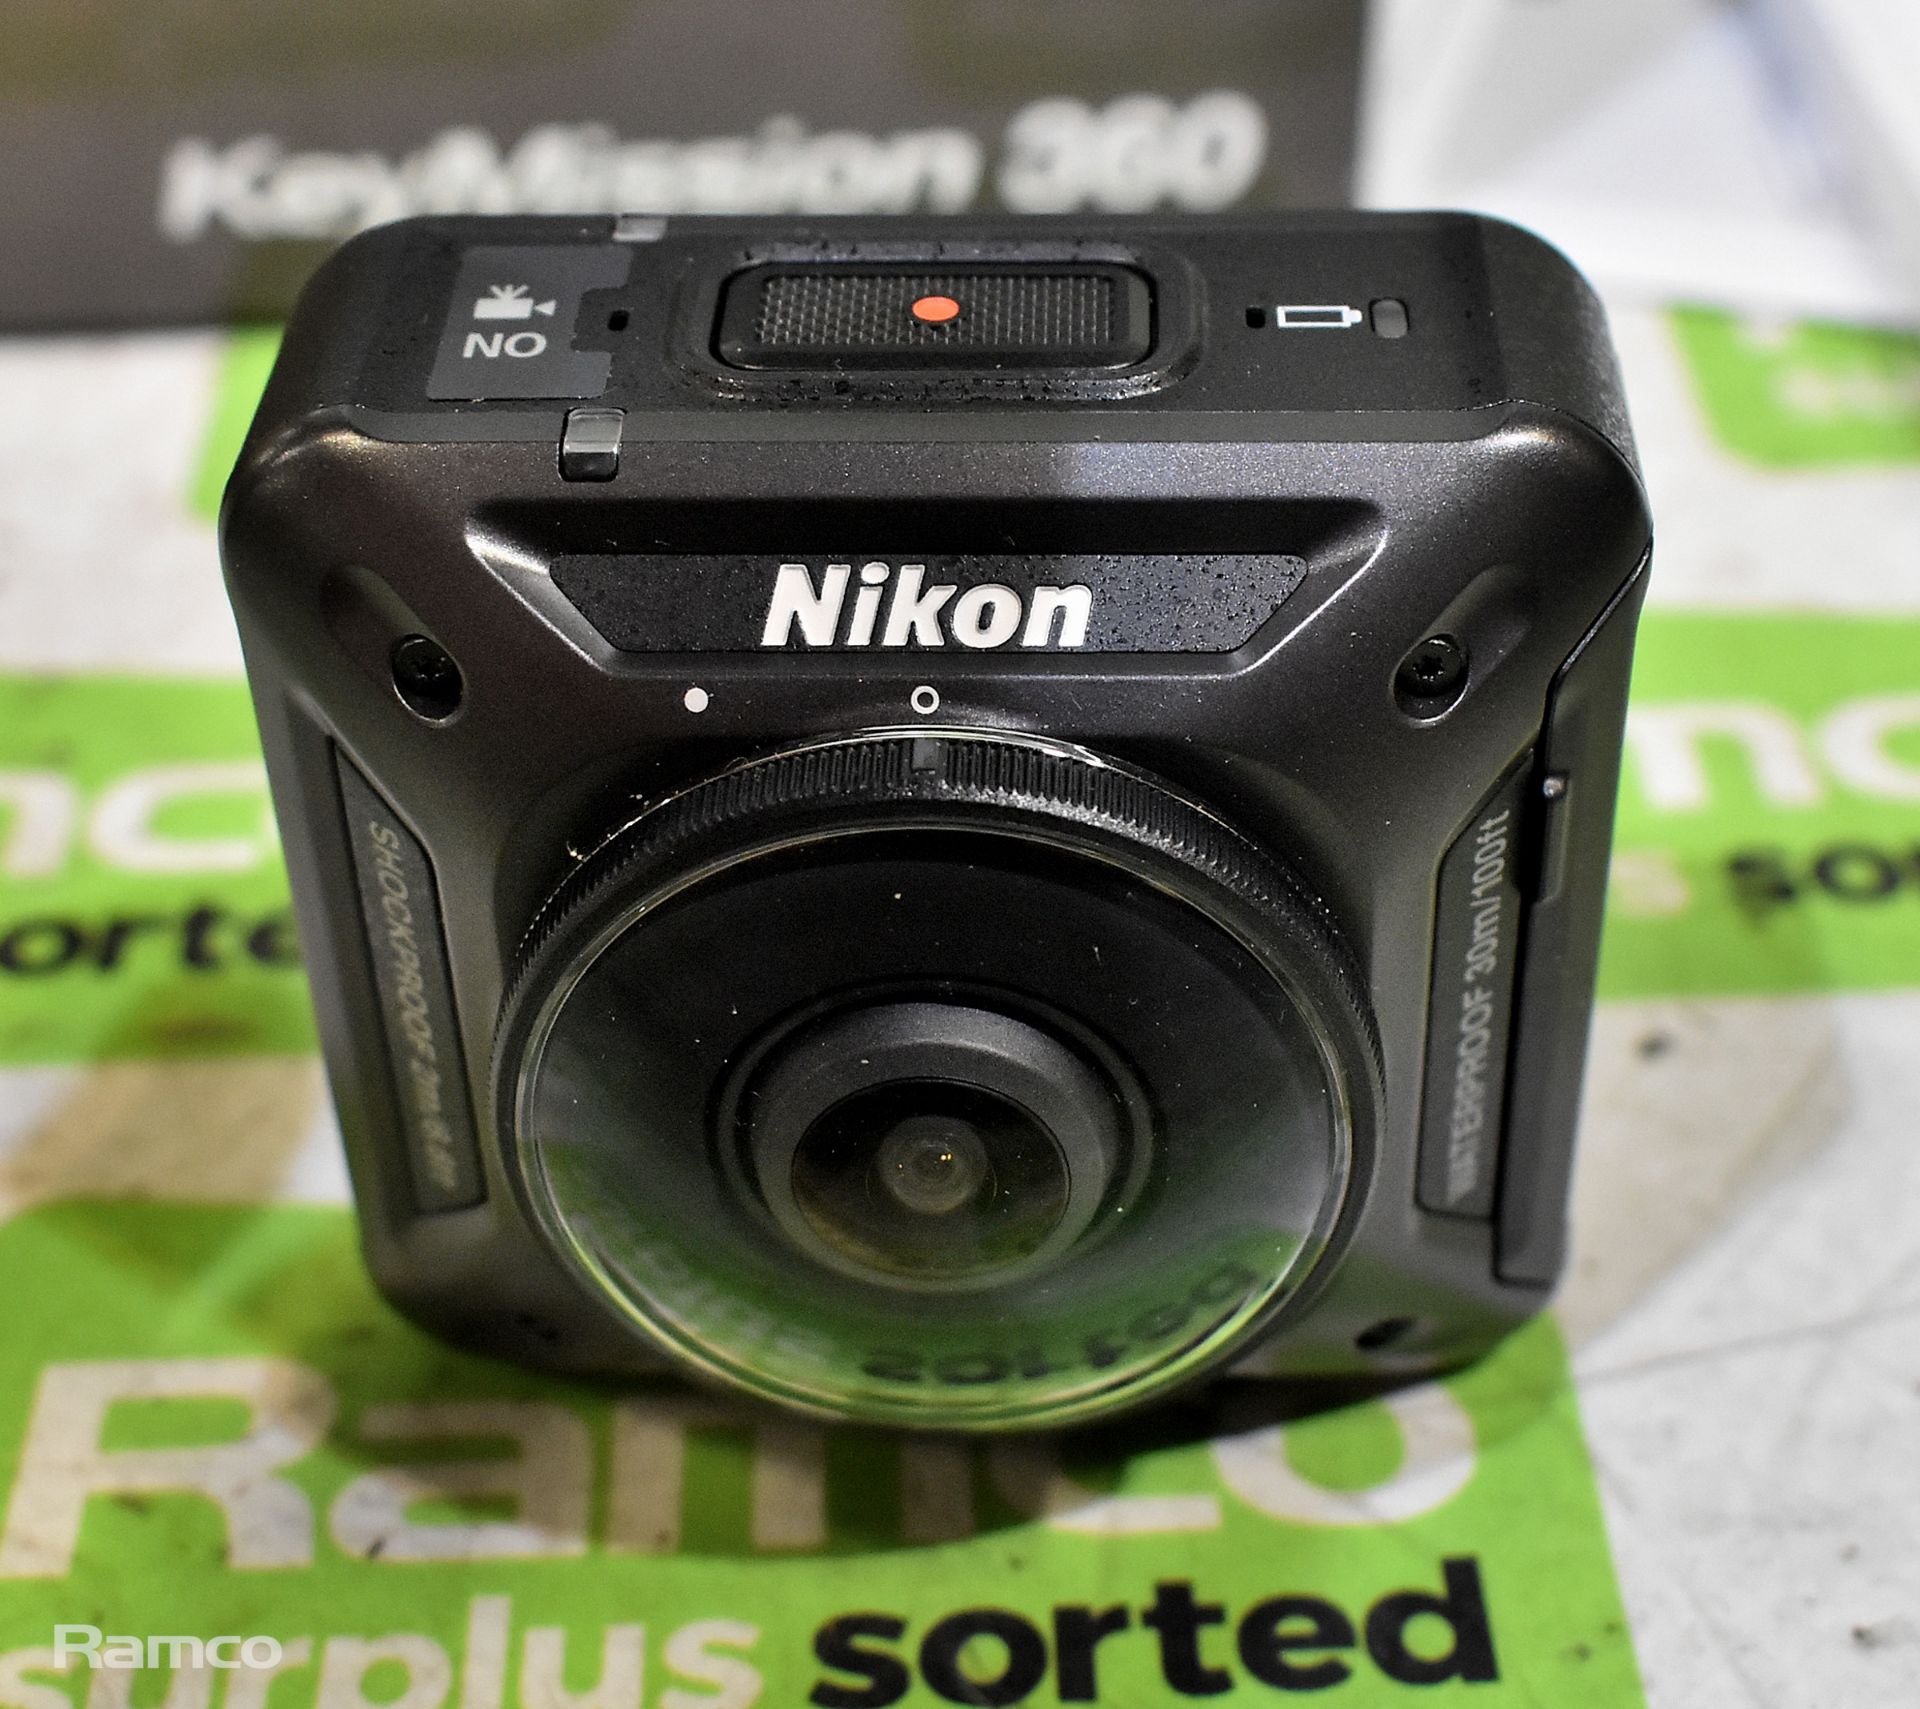 Nikon Keymission 360 action camera with box (incomplete) - Image 5 of 7